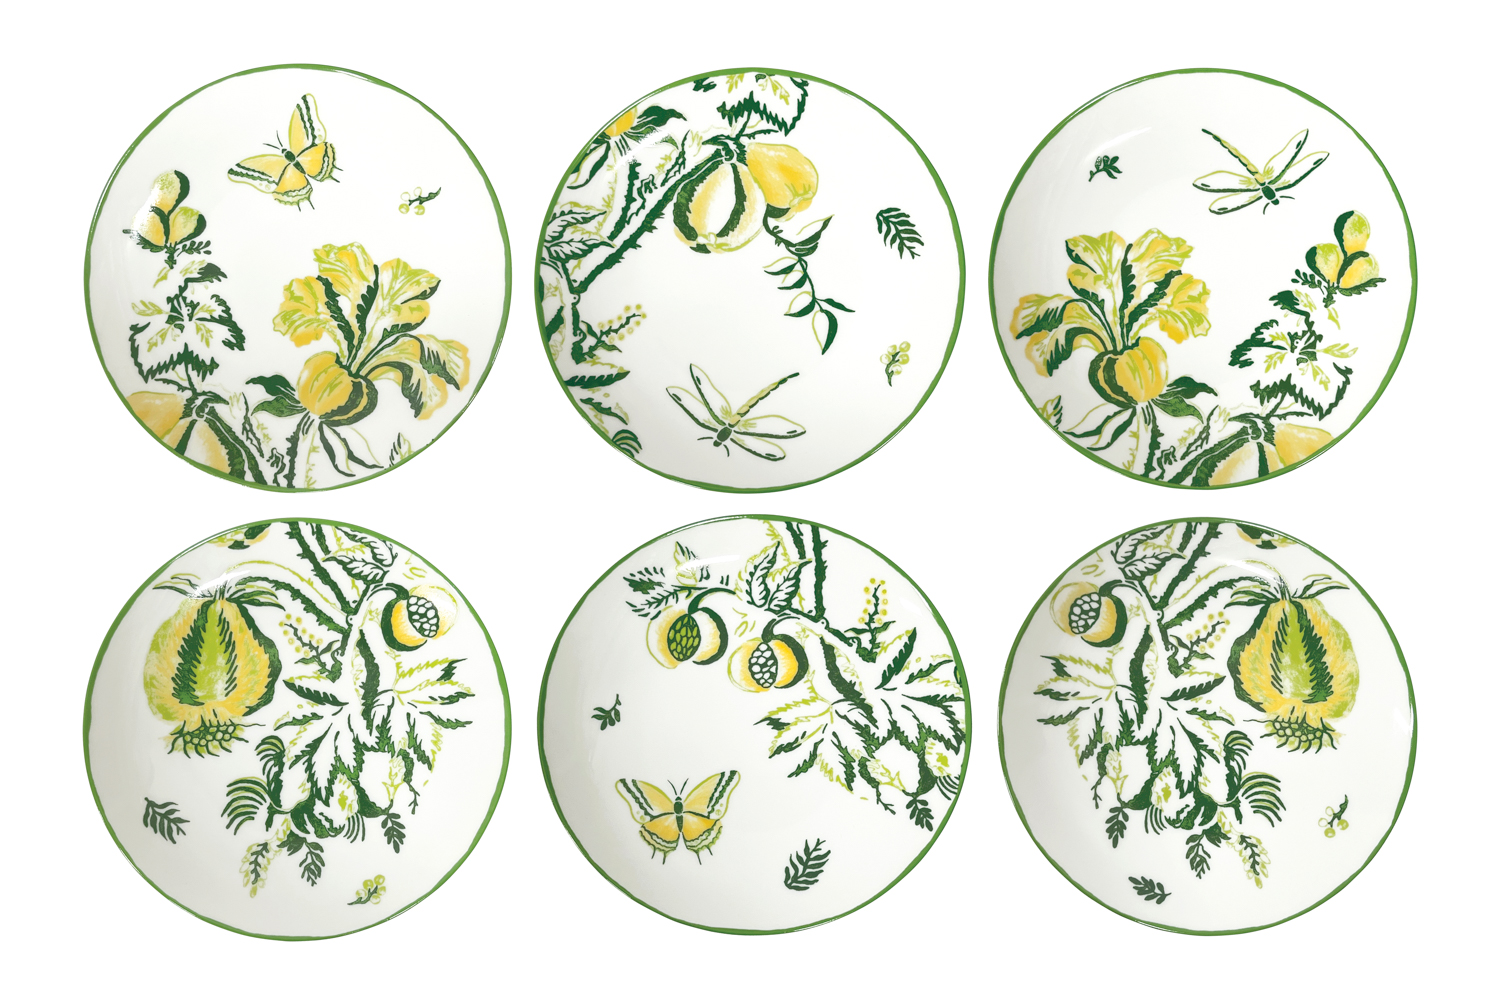 Dessert plates with green-and-yellow floral designs with butterflies and dragonflies from Casa Branca